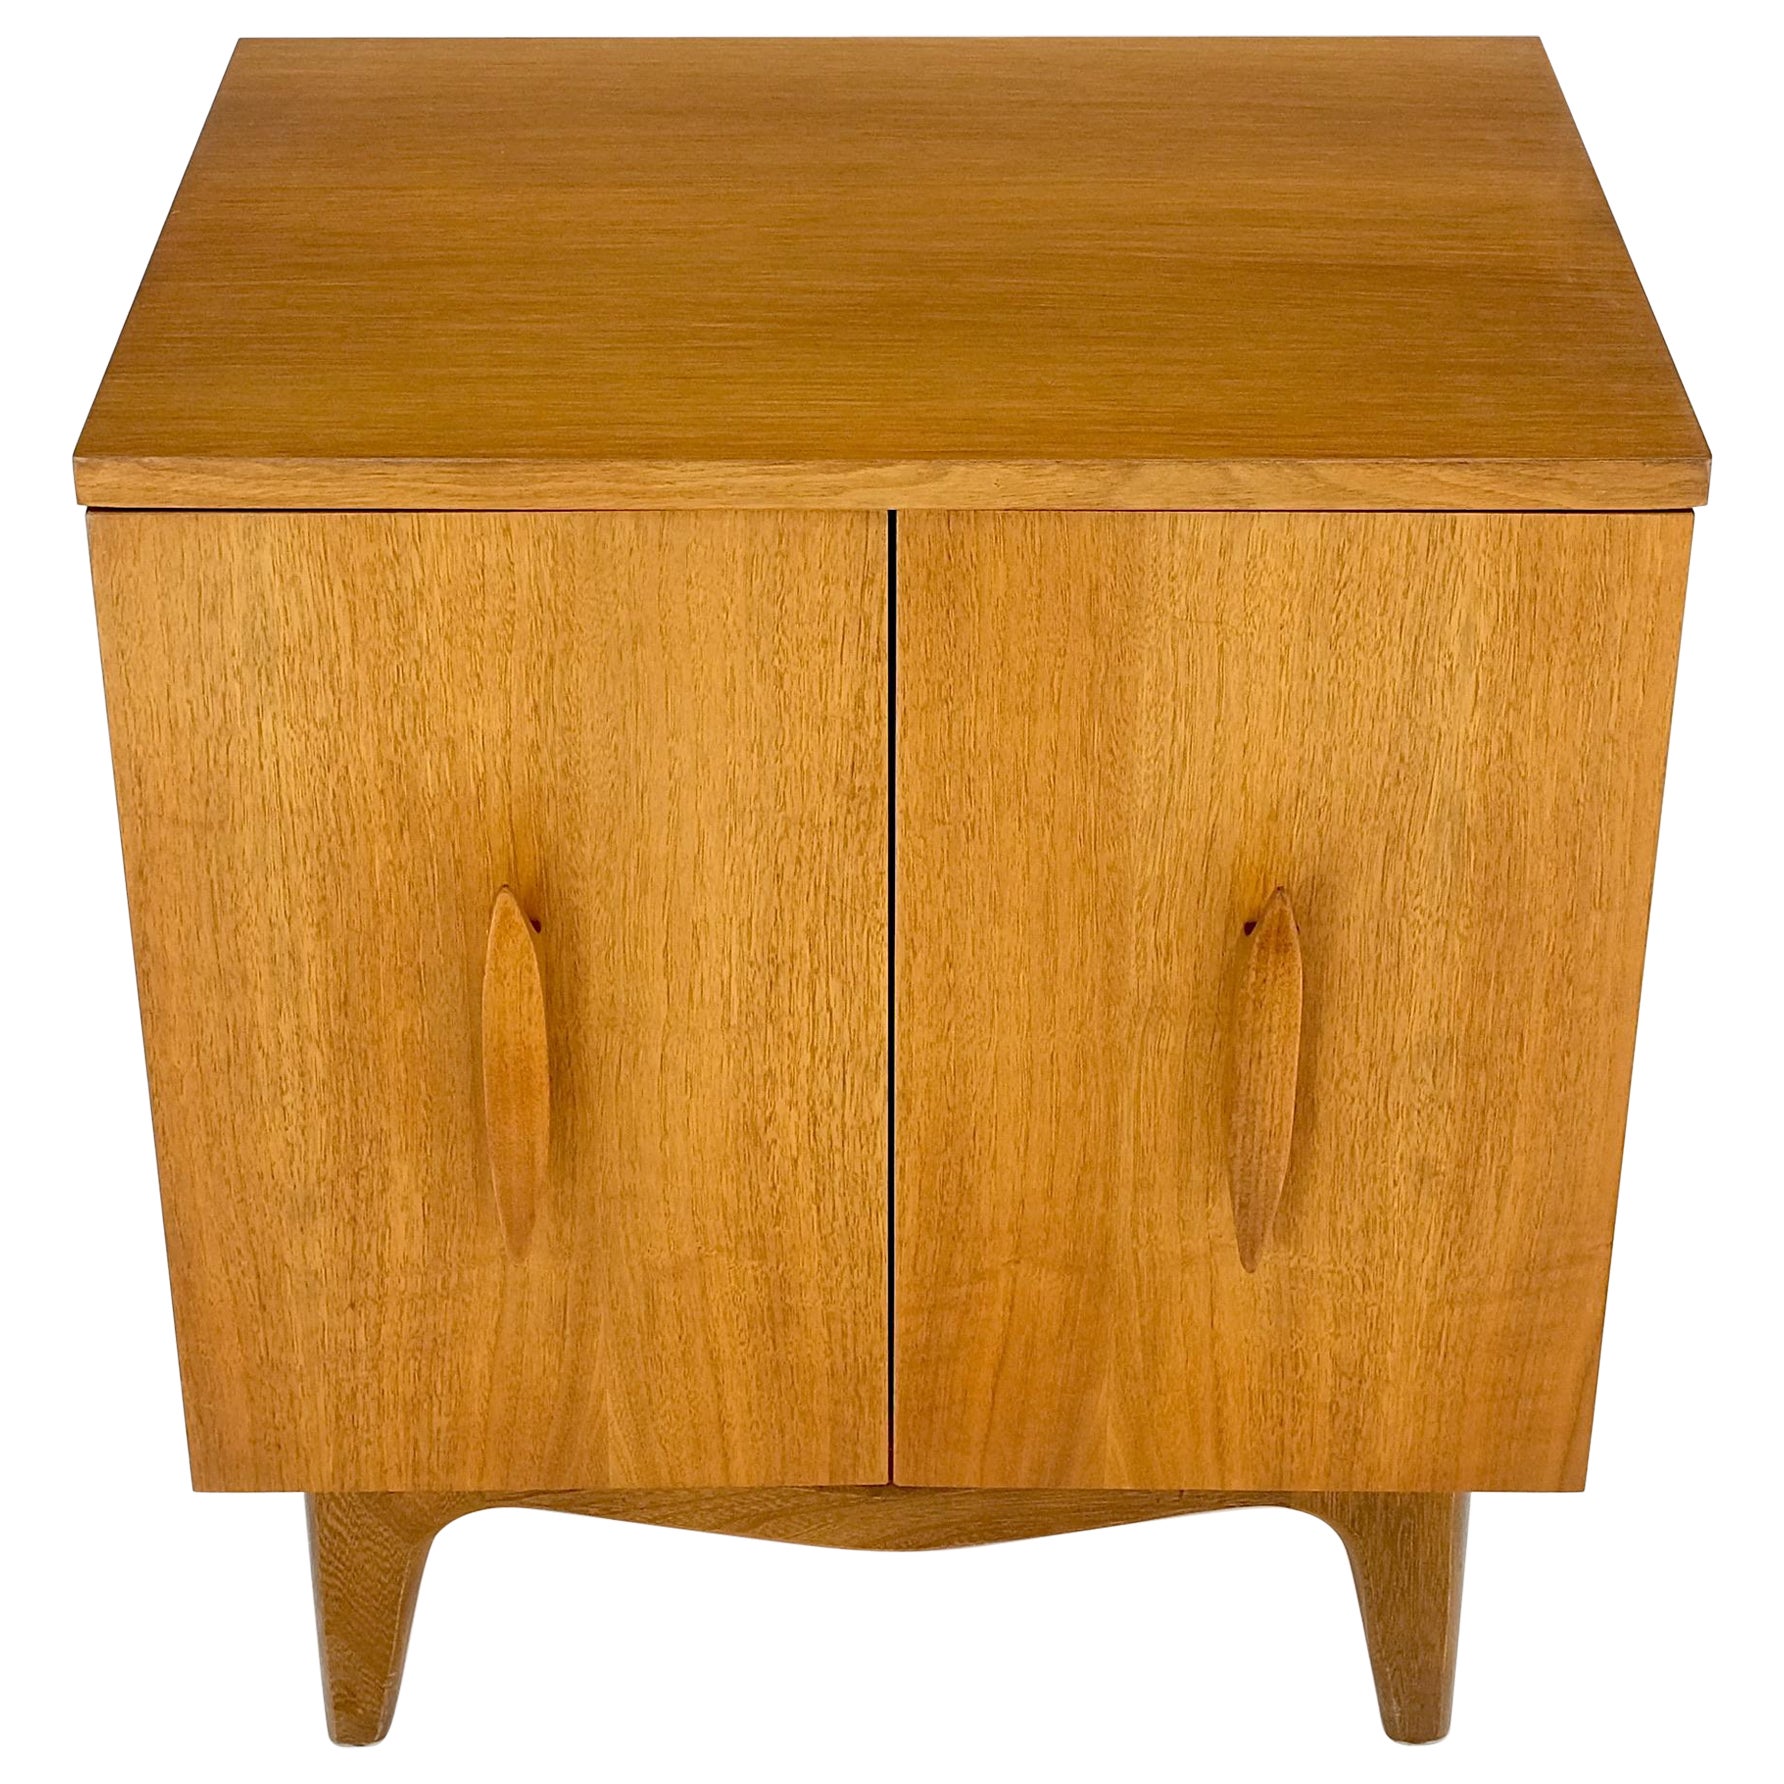 Light Walnut Banana Shape Pulls Two Doors End Table Nightstand Mint! For Sale